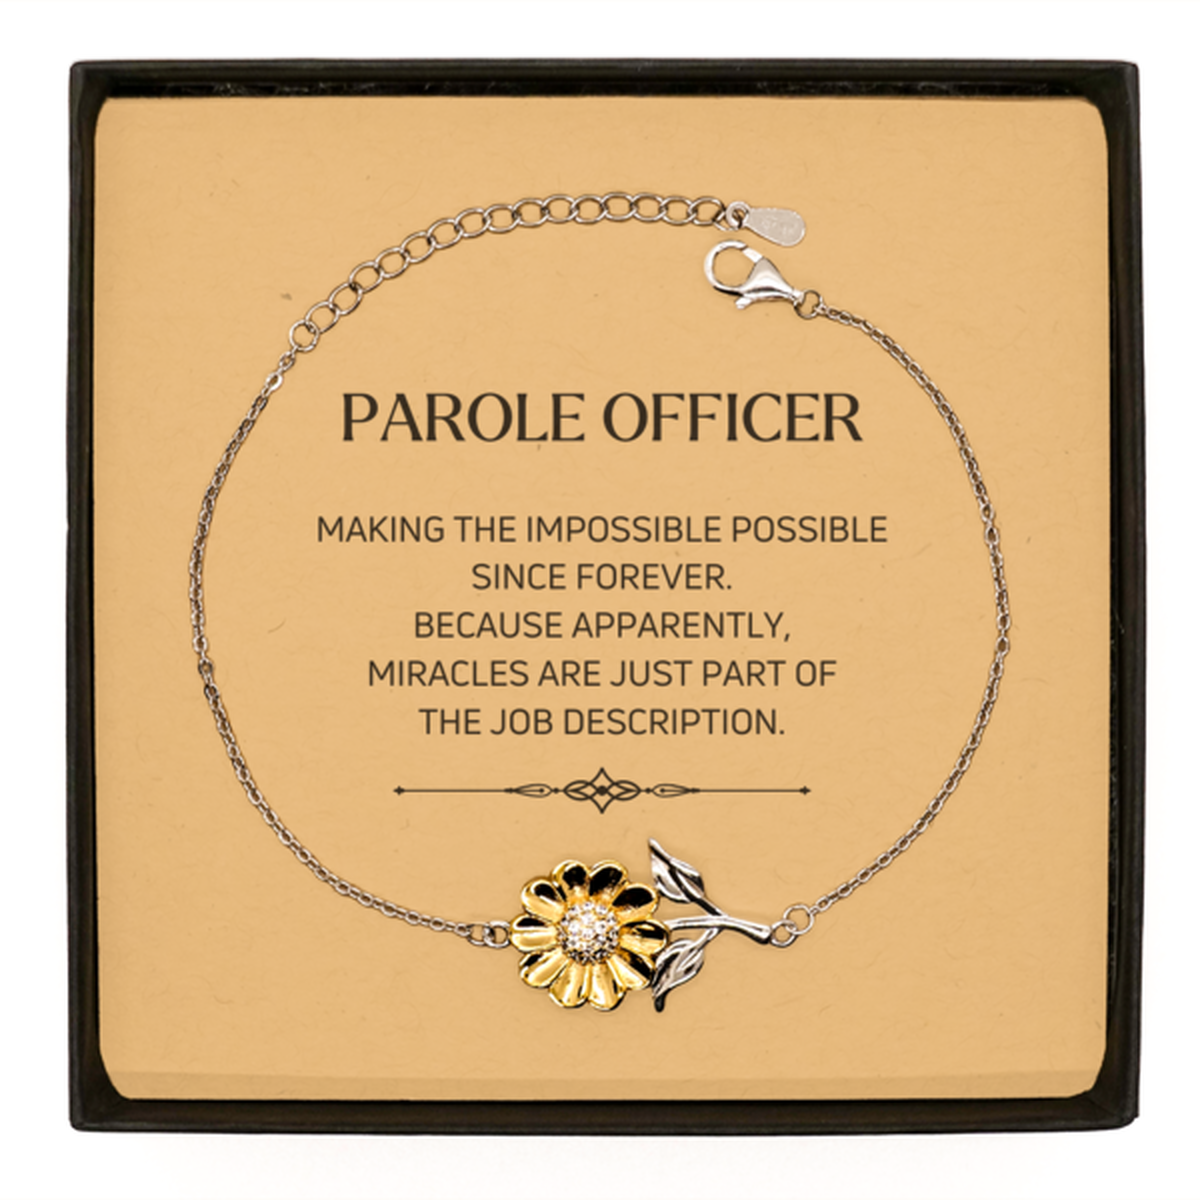 Funny Parole Officer Gifts, Miracles are just part of the job description, Inspirational Birthday Sunflower Bracelet For Parole Officer, Men, Women, Coworkers, Friends, Boss